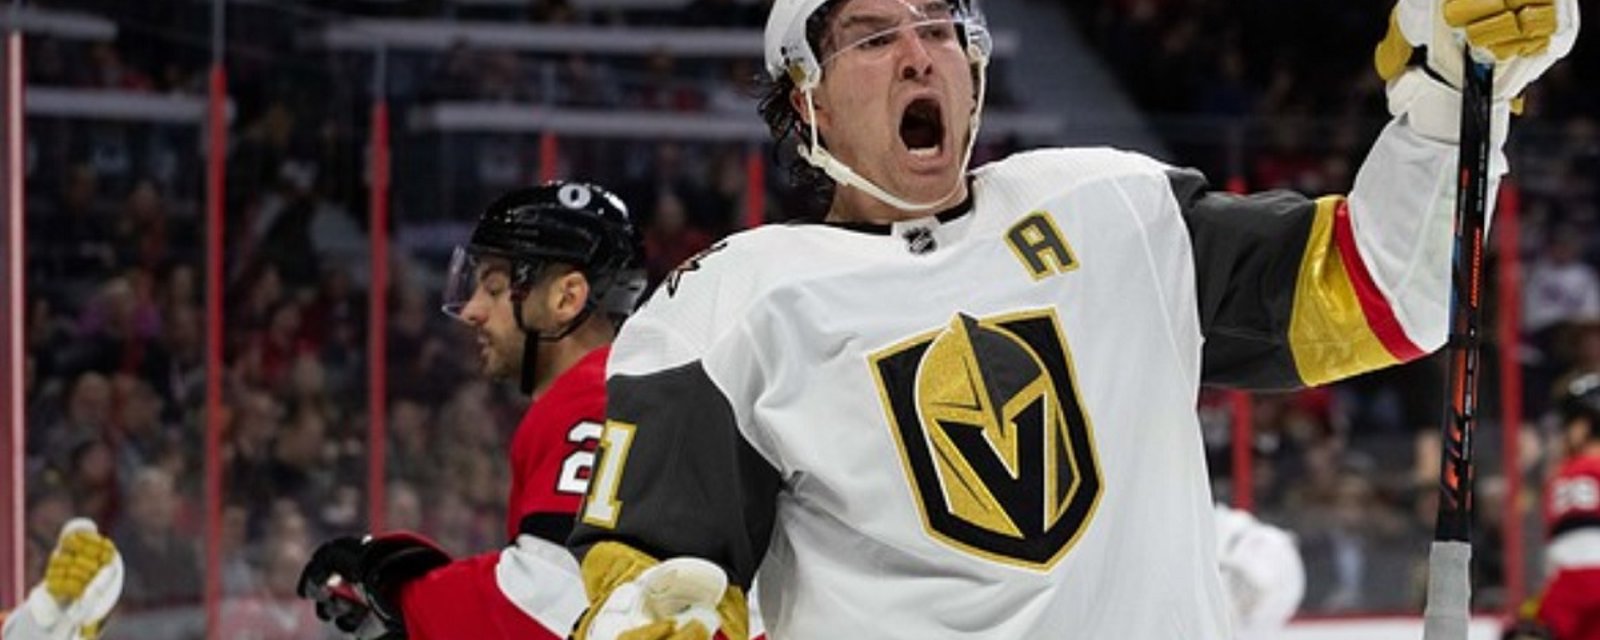 Mark Stone provides an update on his injury.